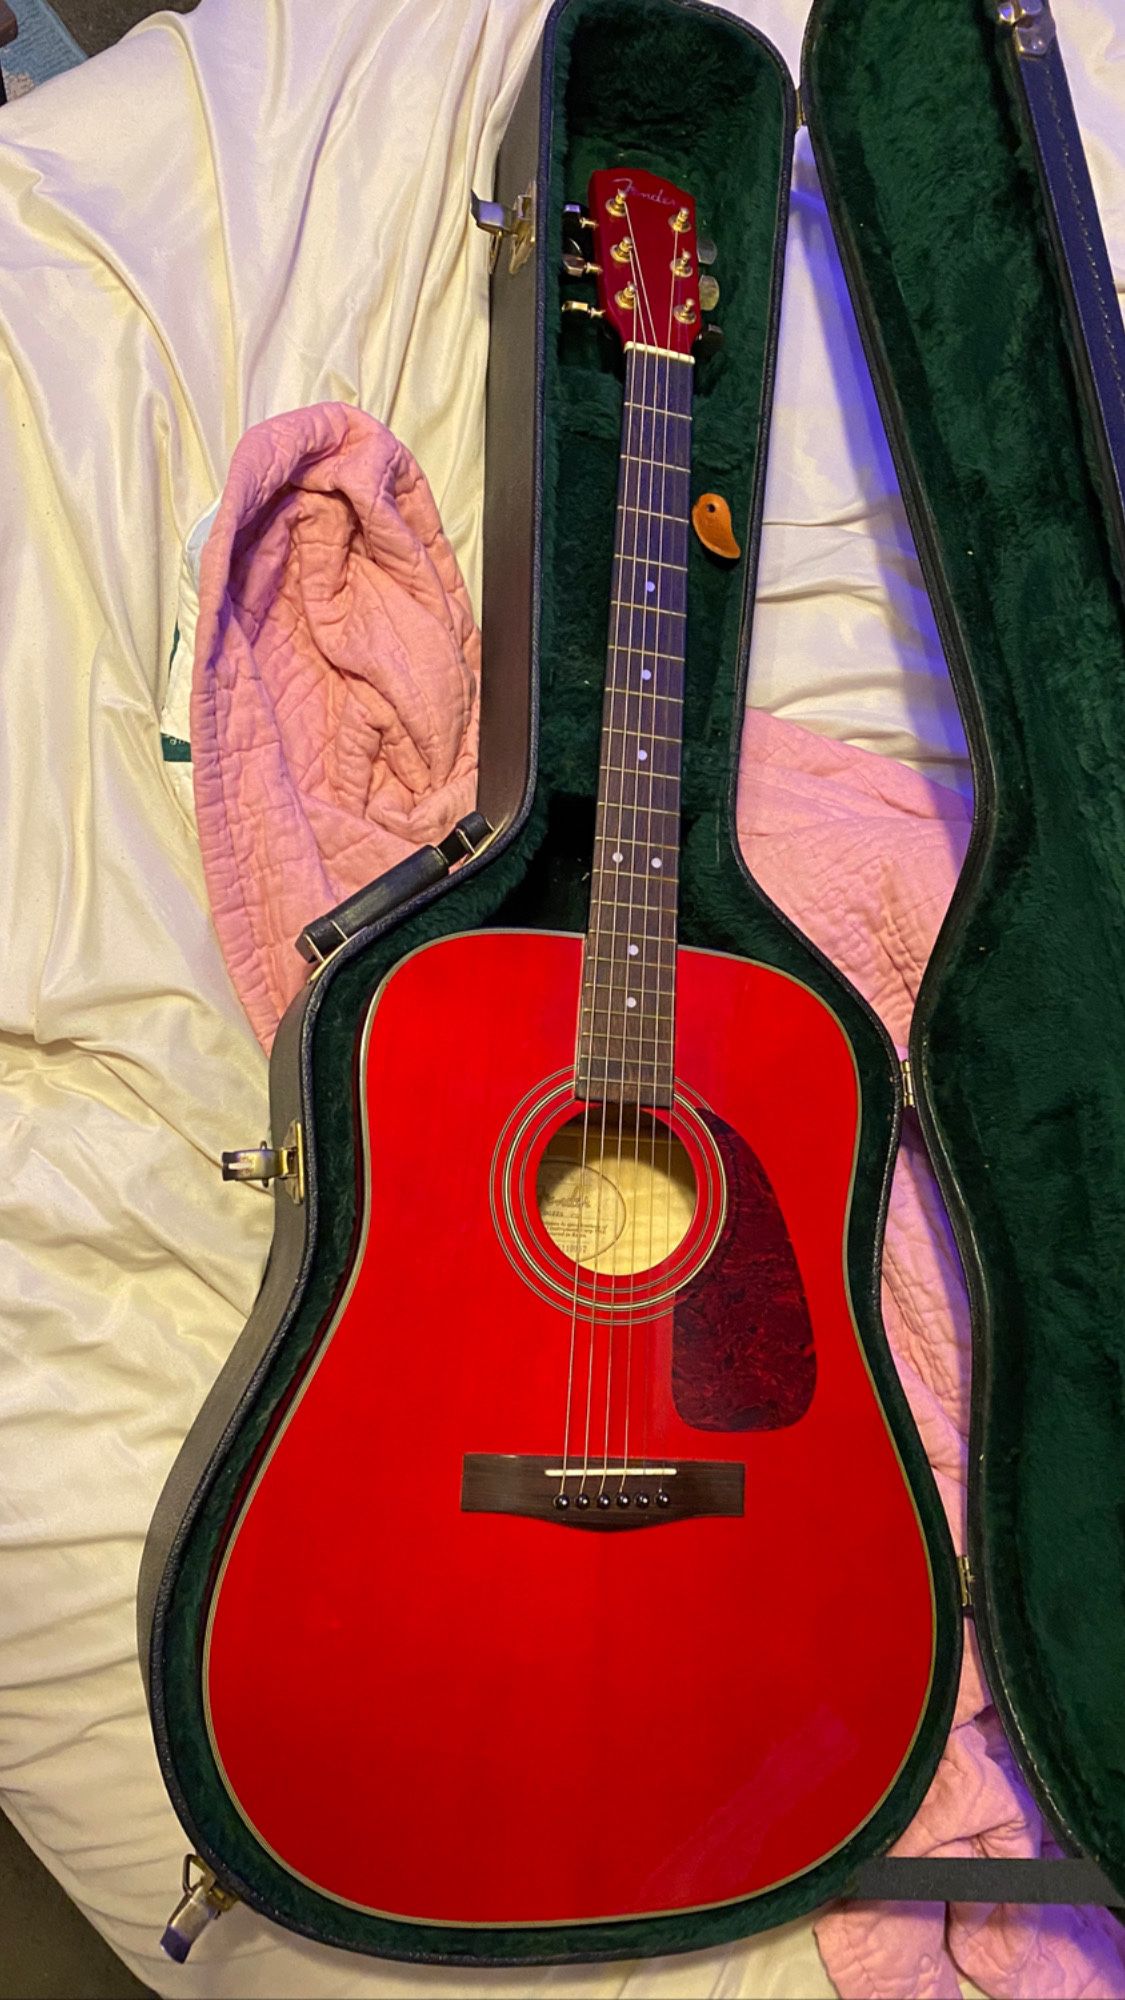 Fender DG-22S CHERRY STAIN Guitar (Comes With Guitar Case)